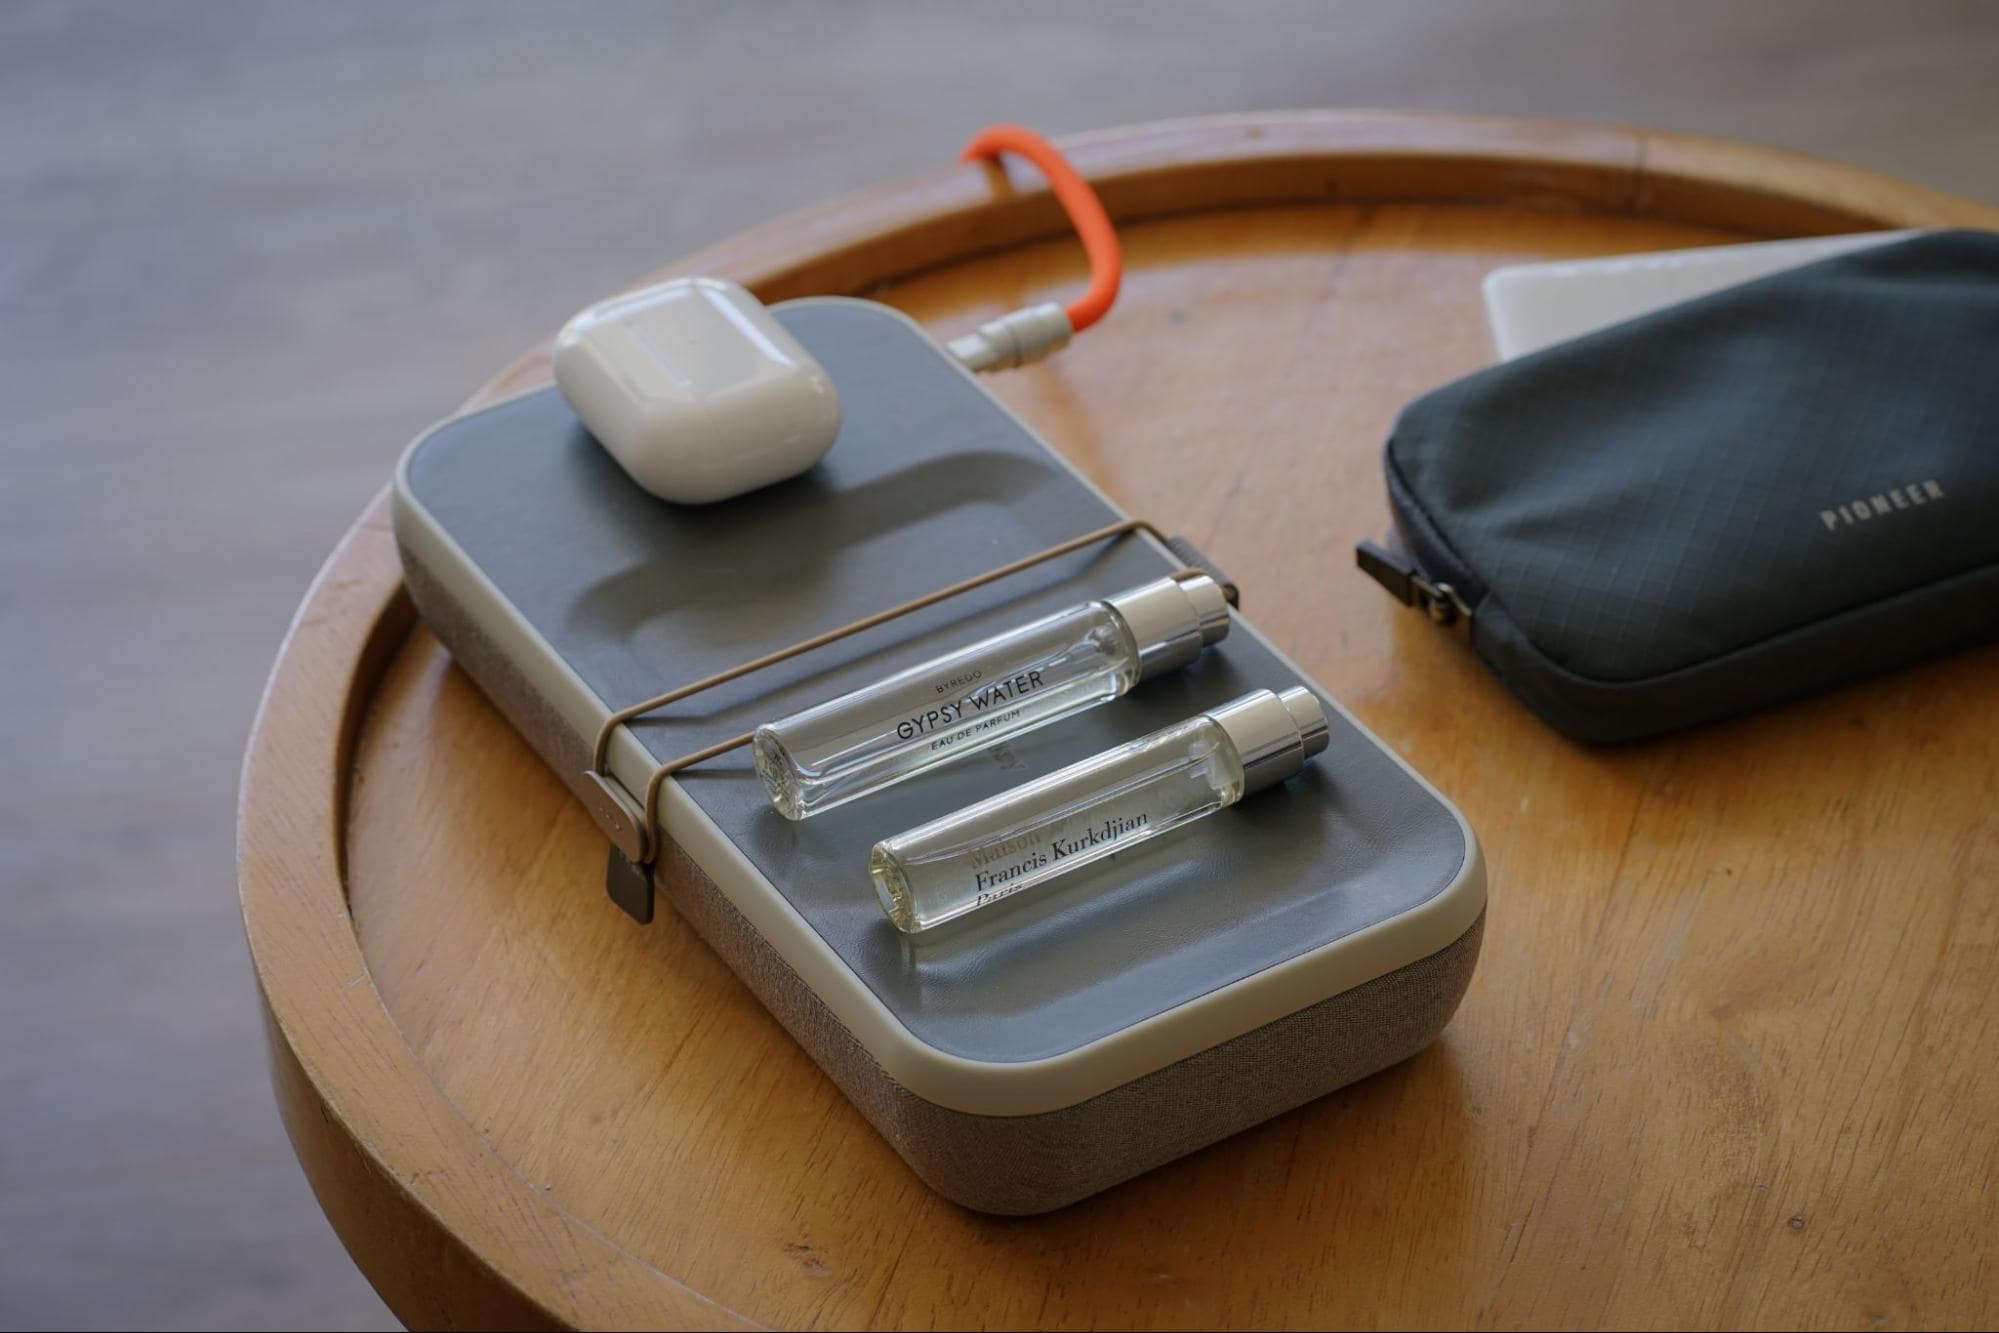 A close-up of a neatly arranged selection of personal items on a wooden table, including a pair of wireless earbuds, two sleek perfume vials, and a portable tech accessory pouch